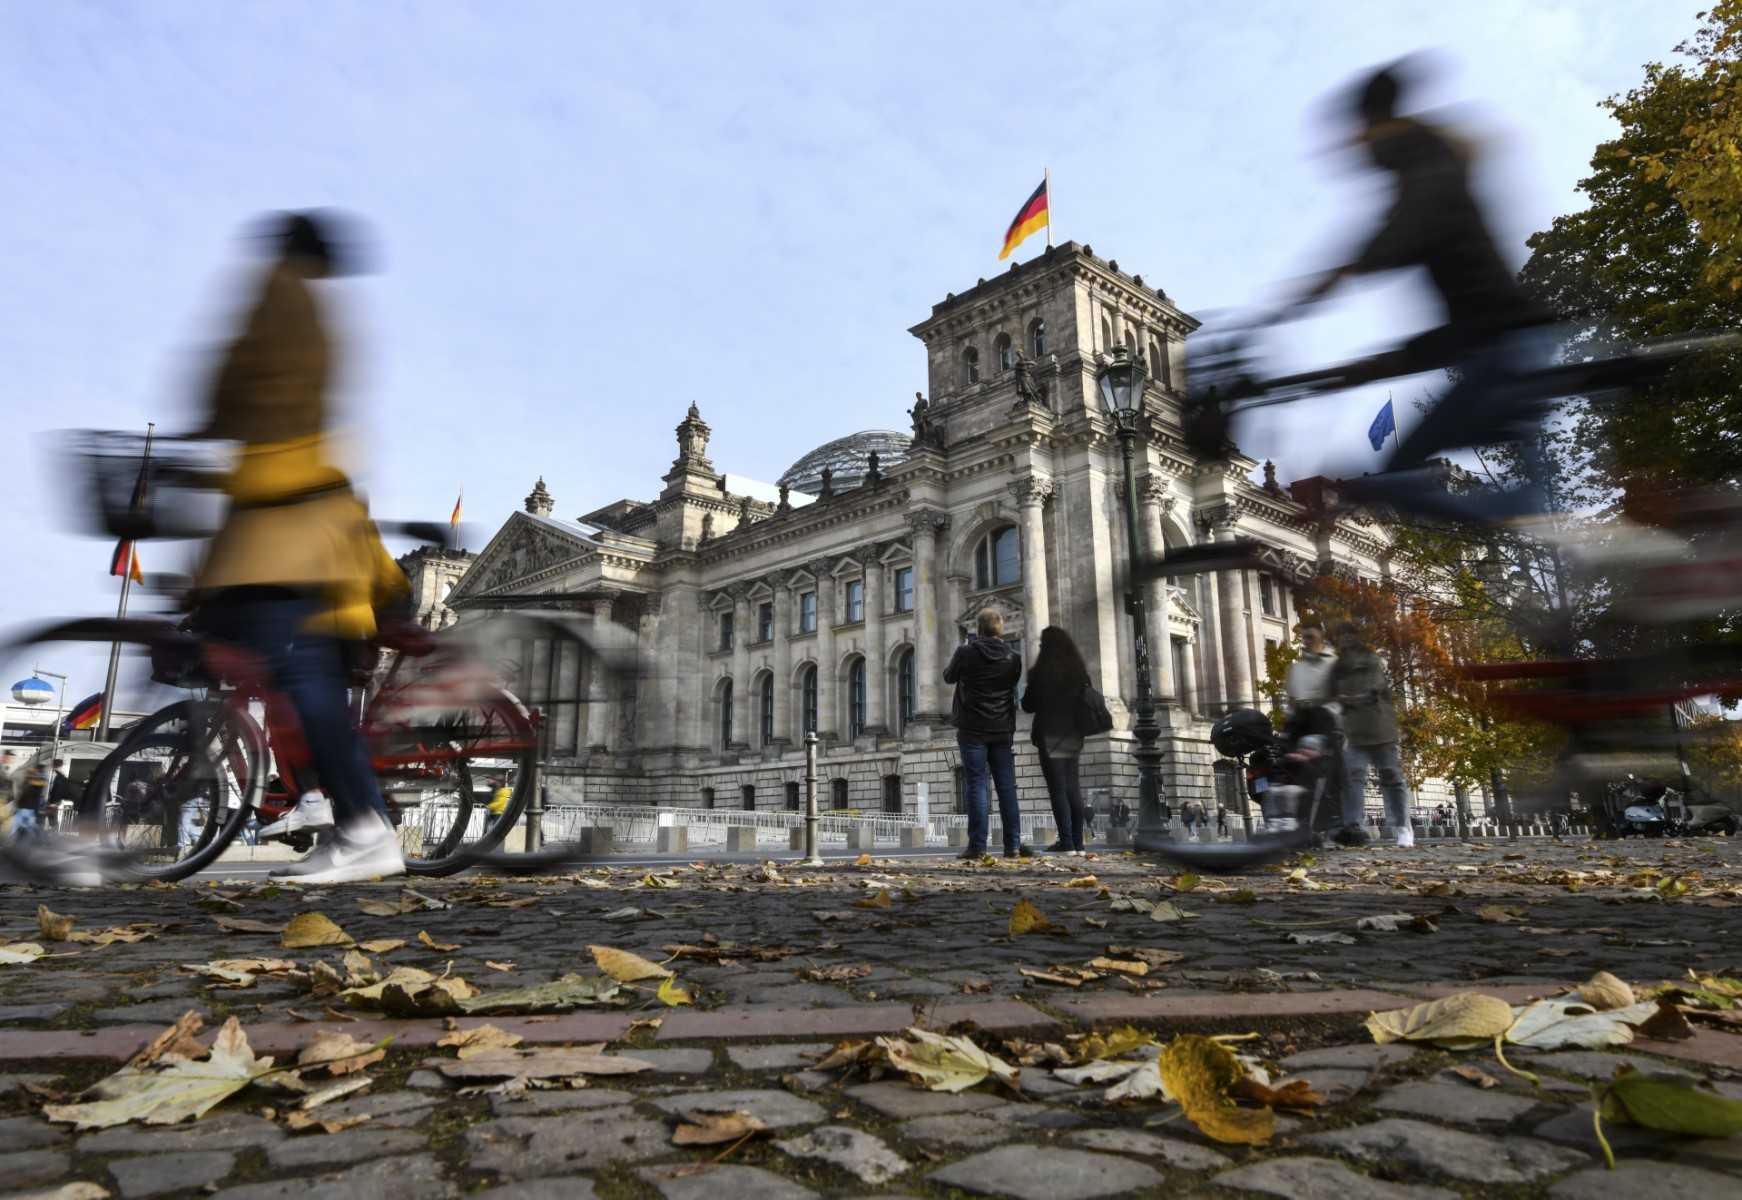 Leaves lie on the ground as pedestrians and bicycle riders are seen in front of the Reichstag building housing the lower house of parliament Bundestag in Berlin, Germany, on Oct 19, 2021. Photo: AFP